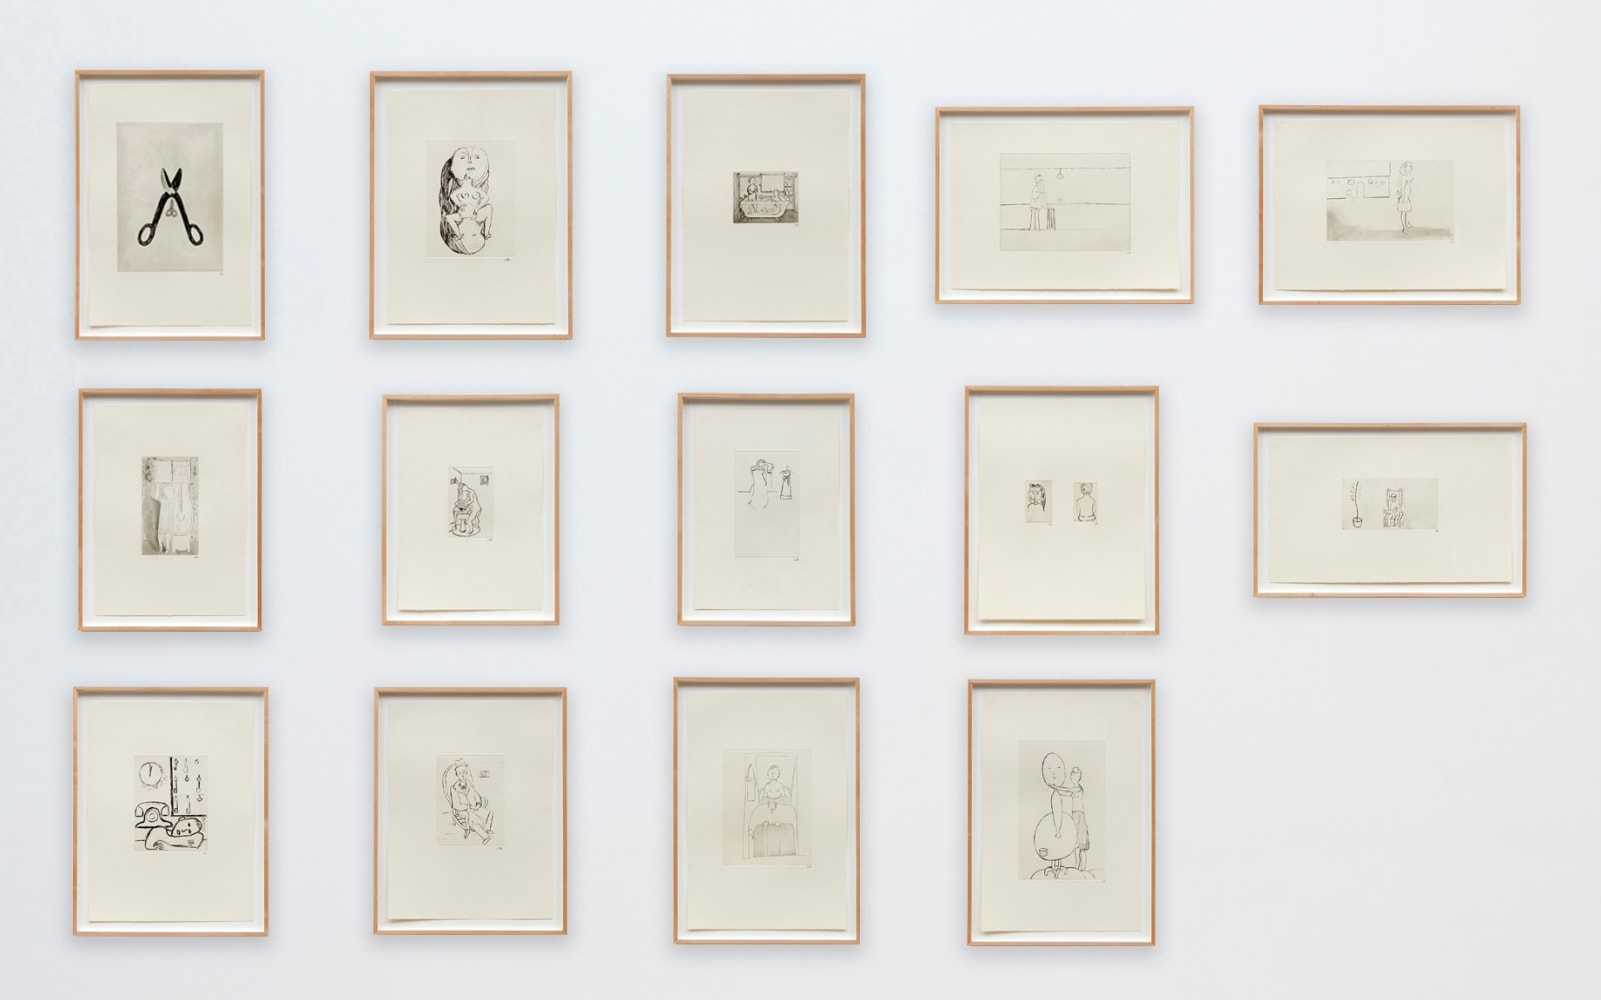 Louise Bourgeois&amp;nbsp;
Autobiographical Series, 1994&amp;nbsp;
14 etchings with drypoint and aquatint on Somerset paper
Various dimensions&amp;nbsp;
Edition of 35 + proofs&amp;nbsp;
Printed by Harlan&amp;nbsp;&amp;amp; Weaver Intaglio, New York
Published by Peter Blum Edition, New York&amp;nbsp;